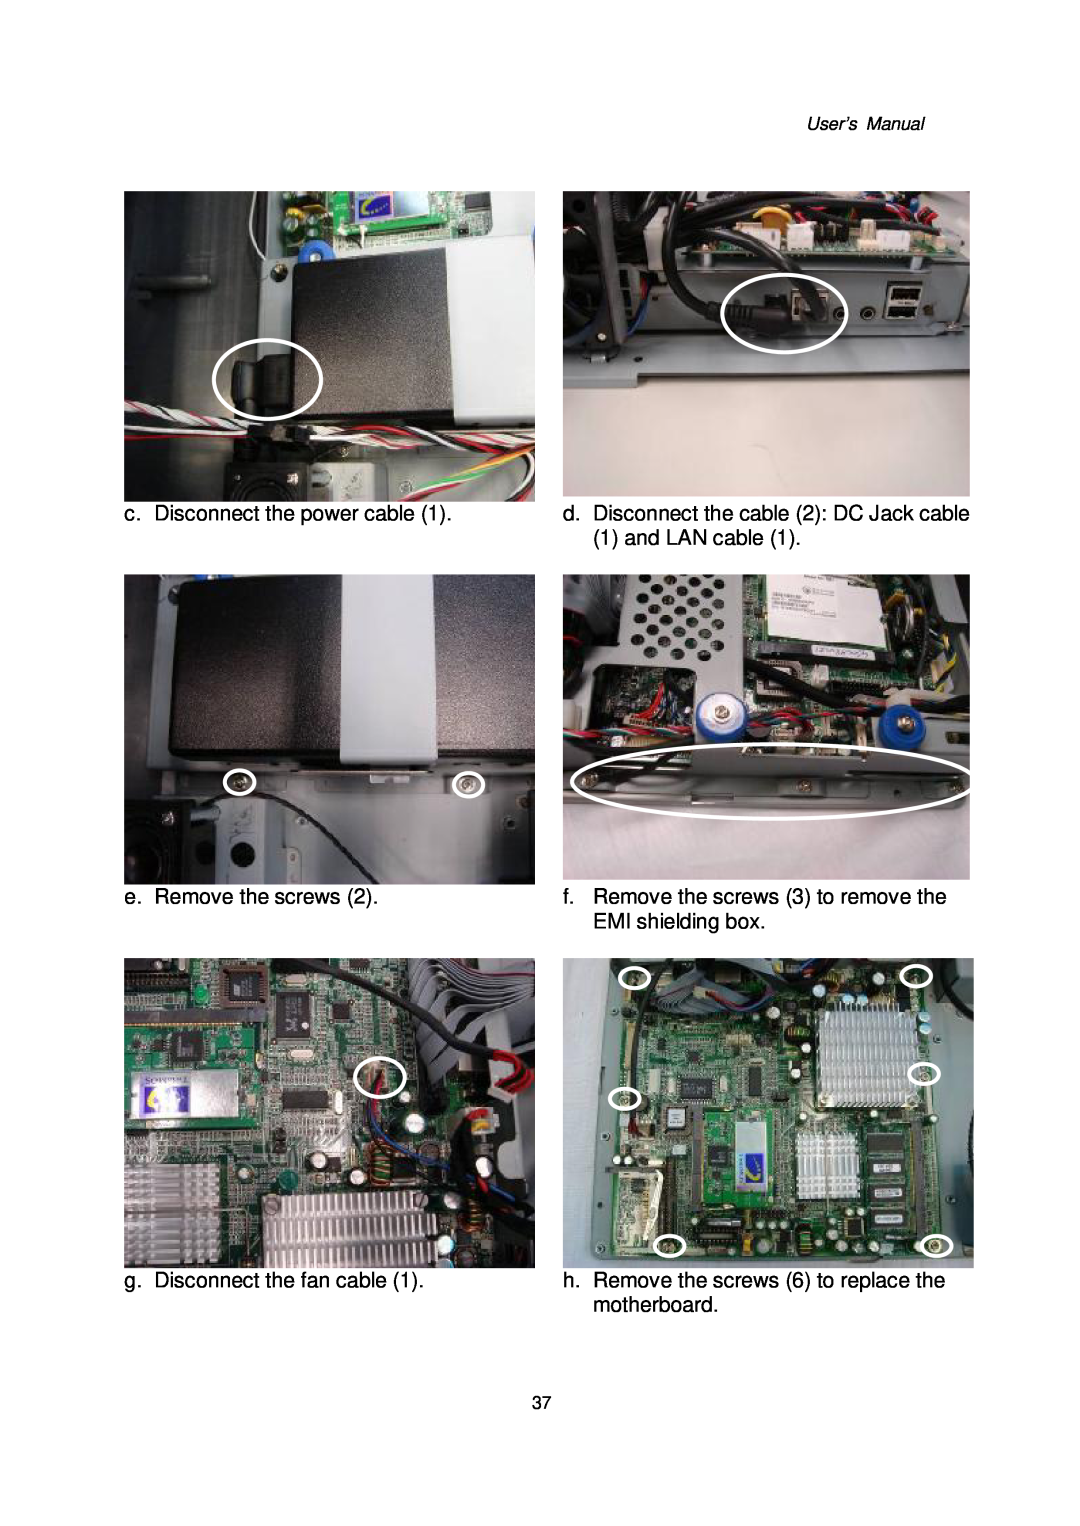 Intel Kiosk Hardware System c. Disconnect the power cable, d. Disconnect the cable 2 DC Jack cable, and LAN cable 